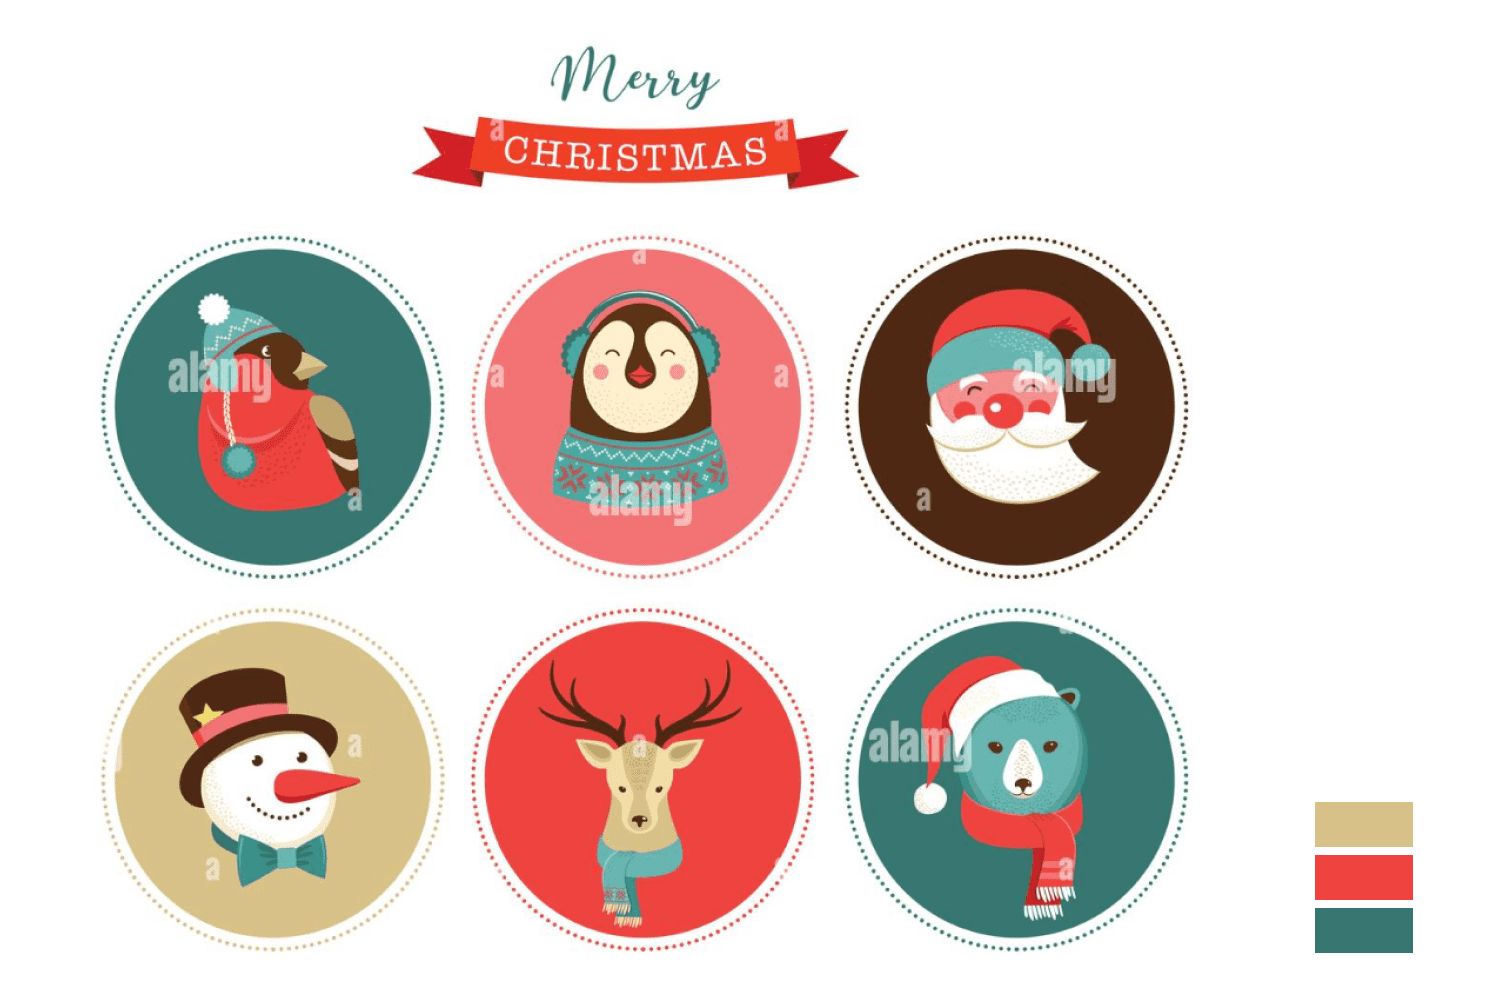 Collage with 6 rounded Christmas graphic icons.